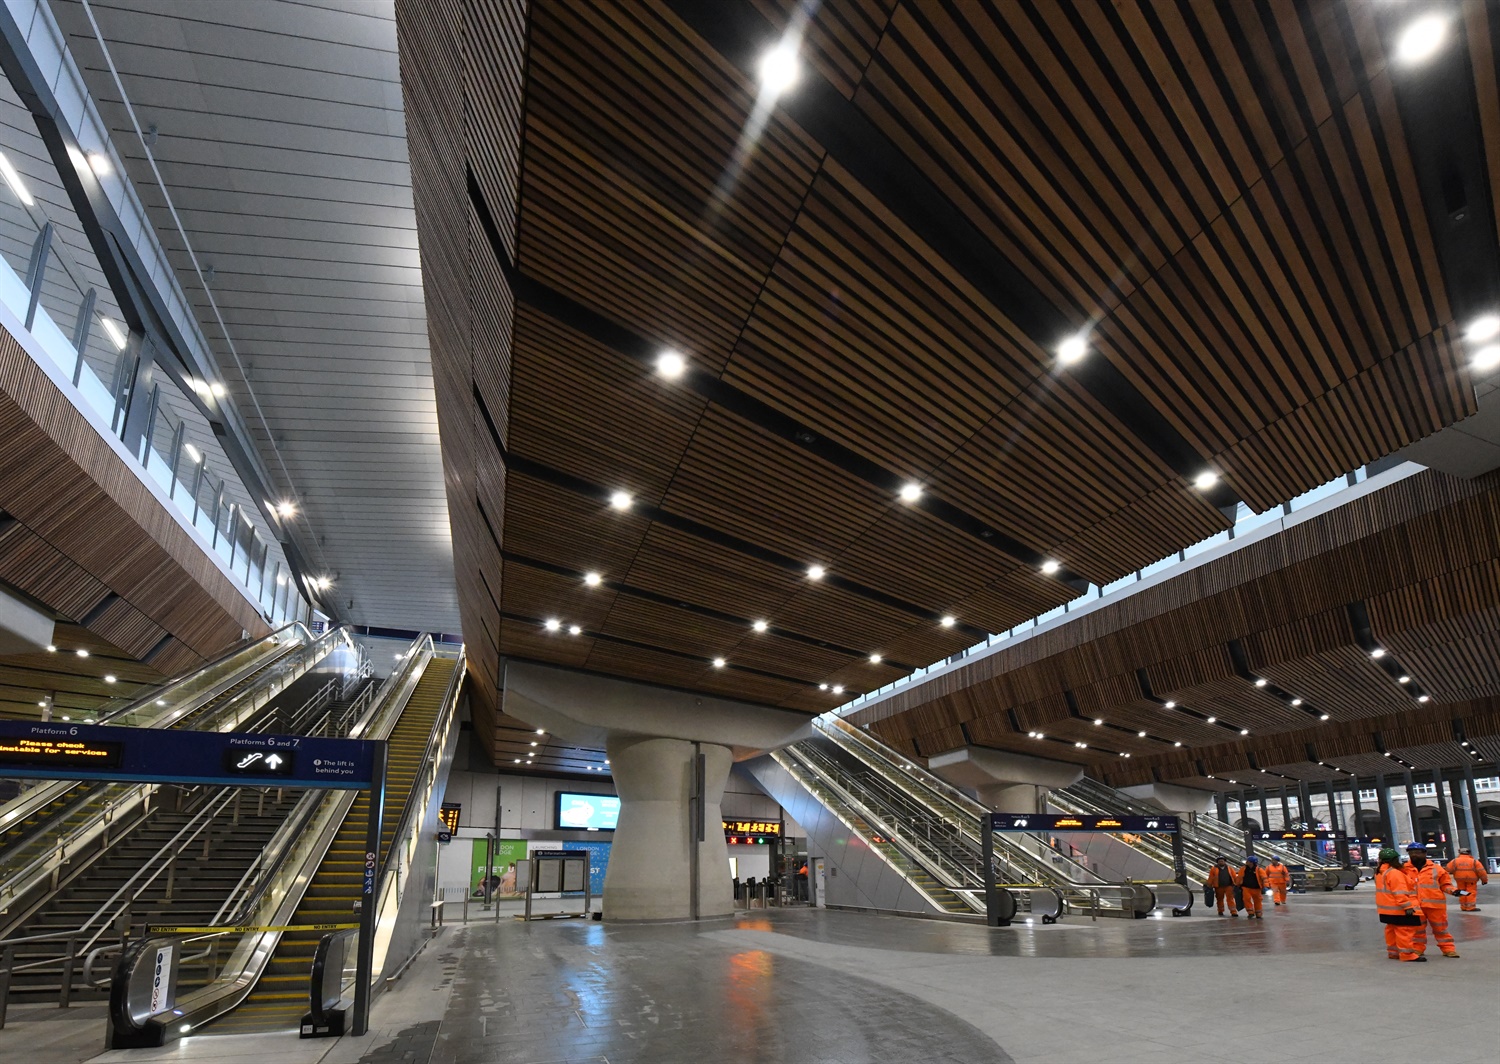 London Bridge opens ‘huge’ new concourse following Christmas works